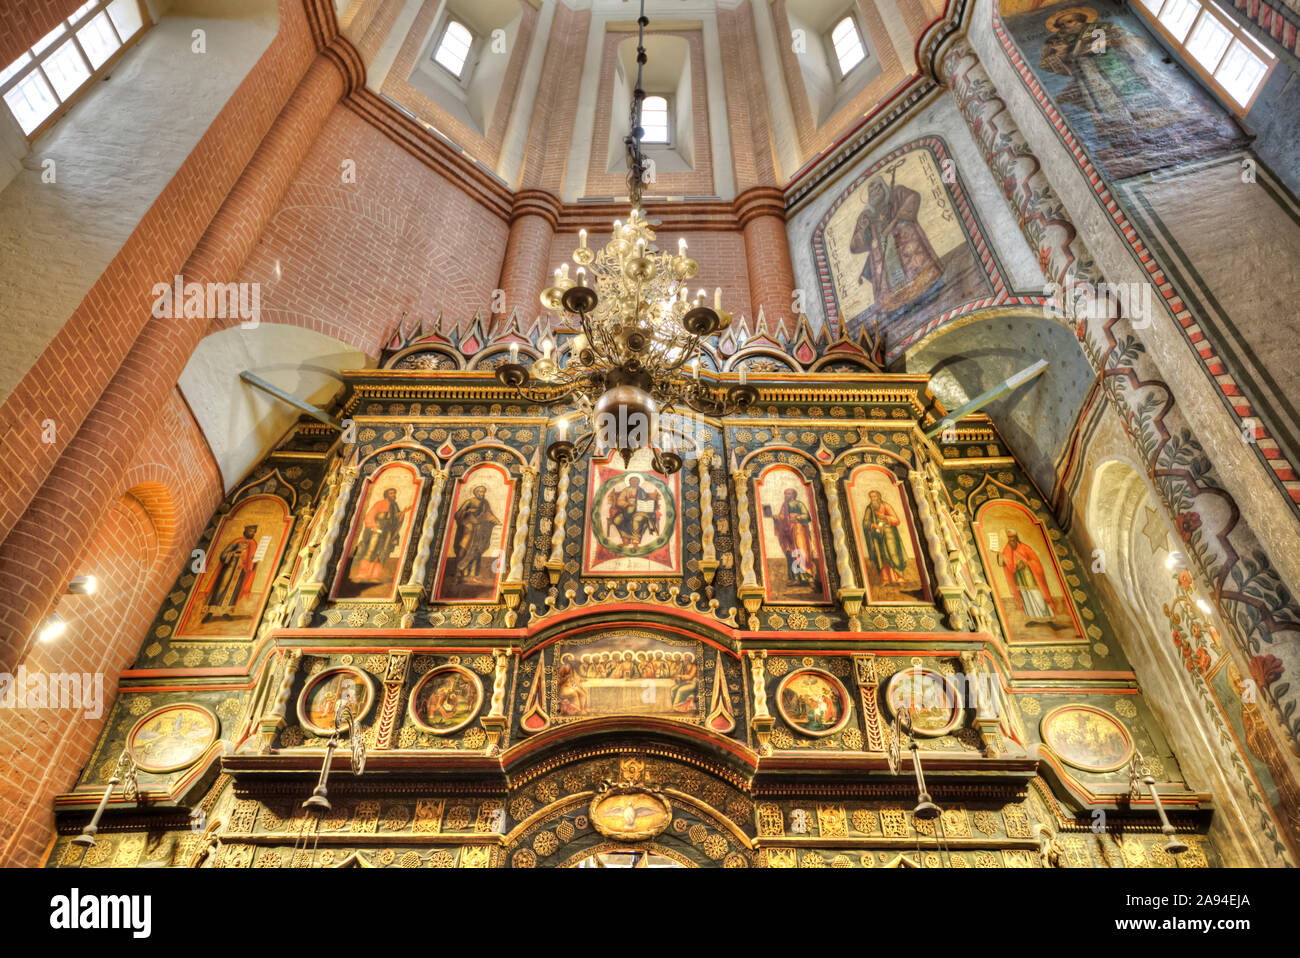 St Basil's Cathedral, interior view of altar; Moscow, Russia Stock Photo